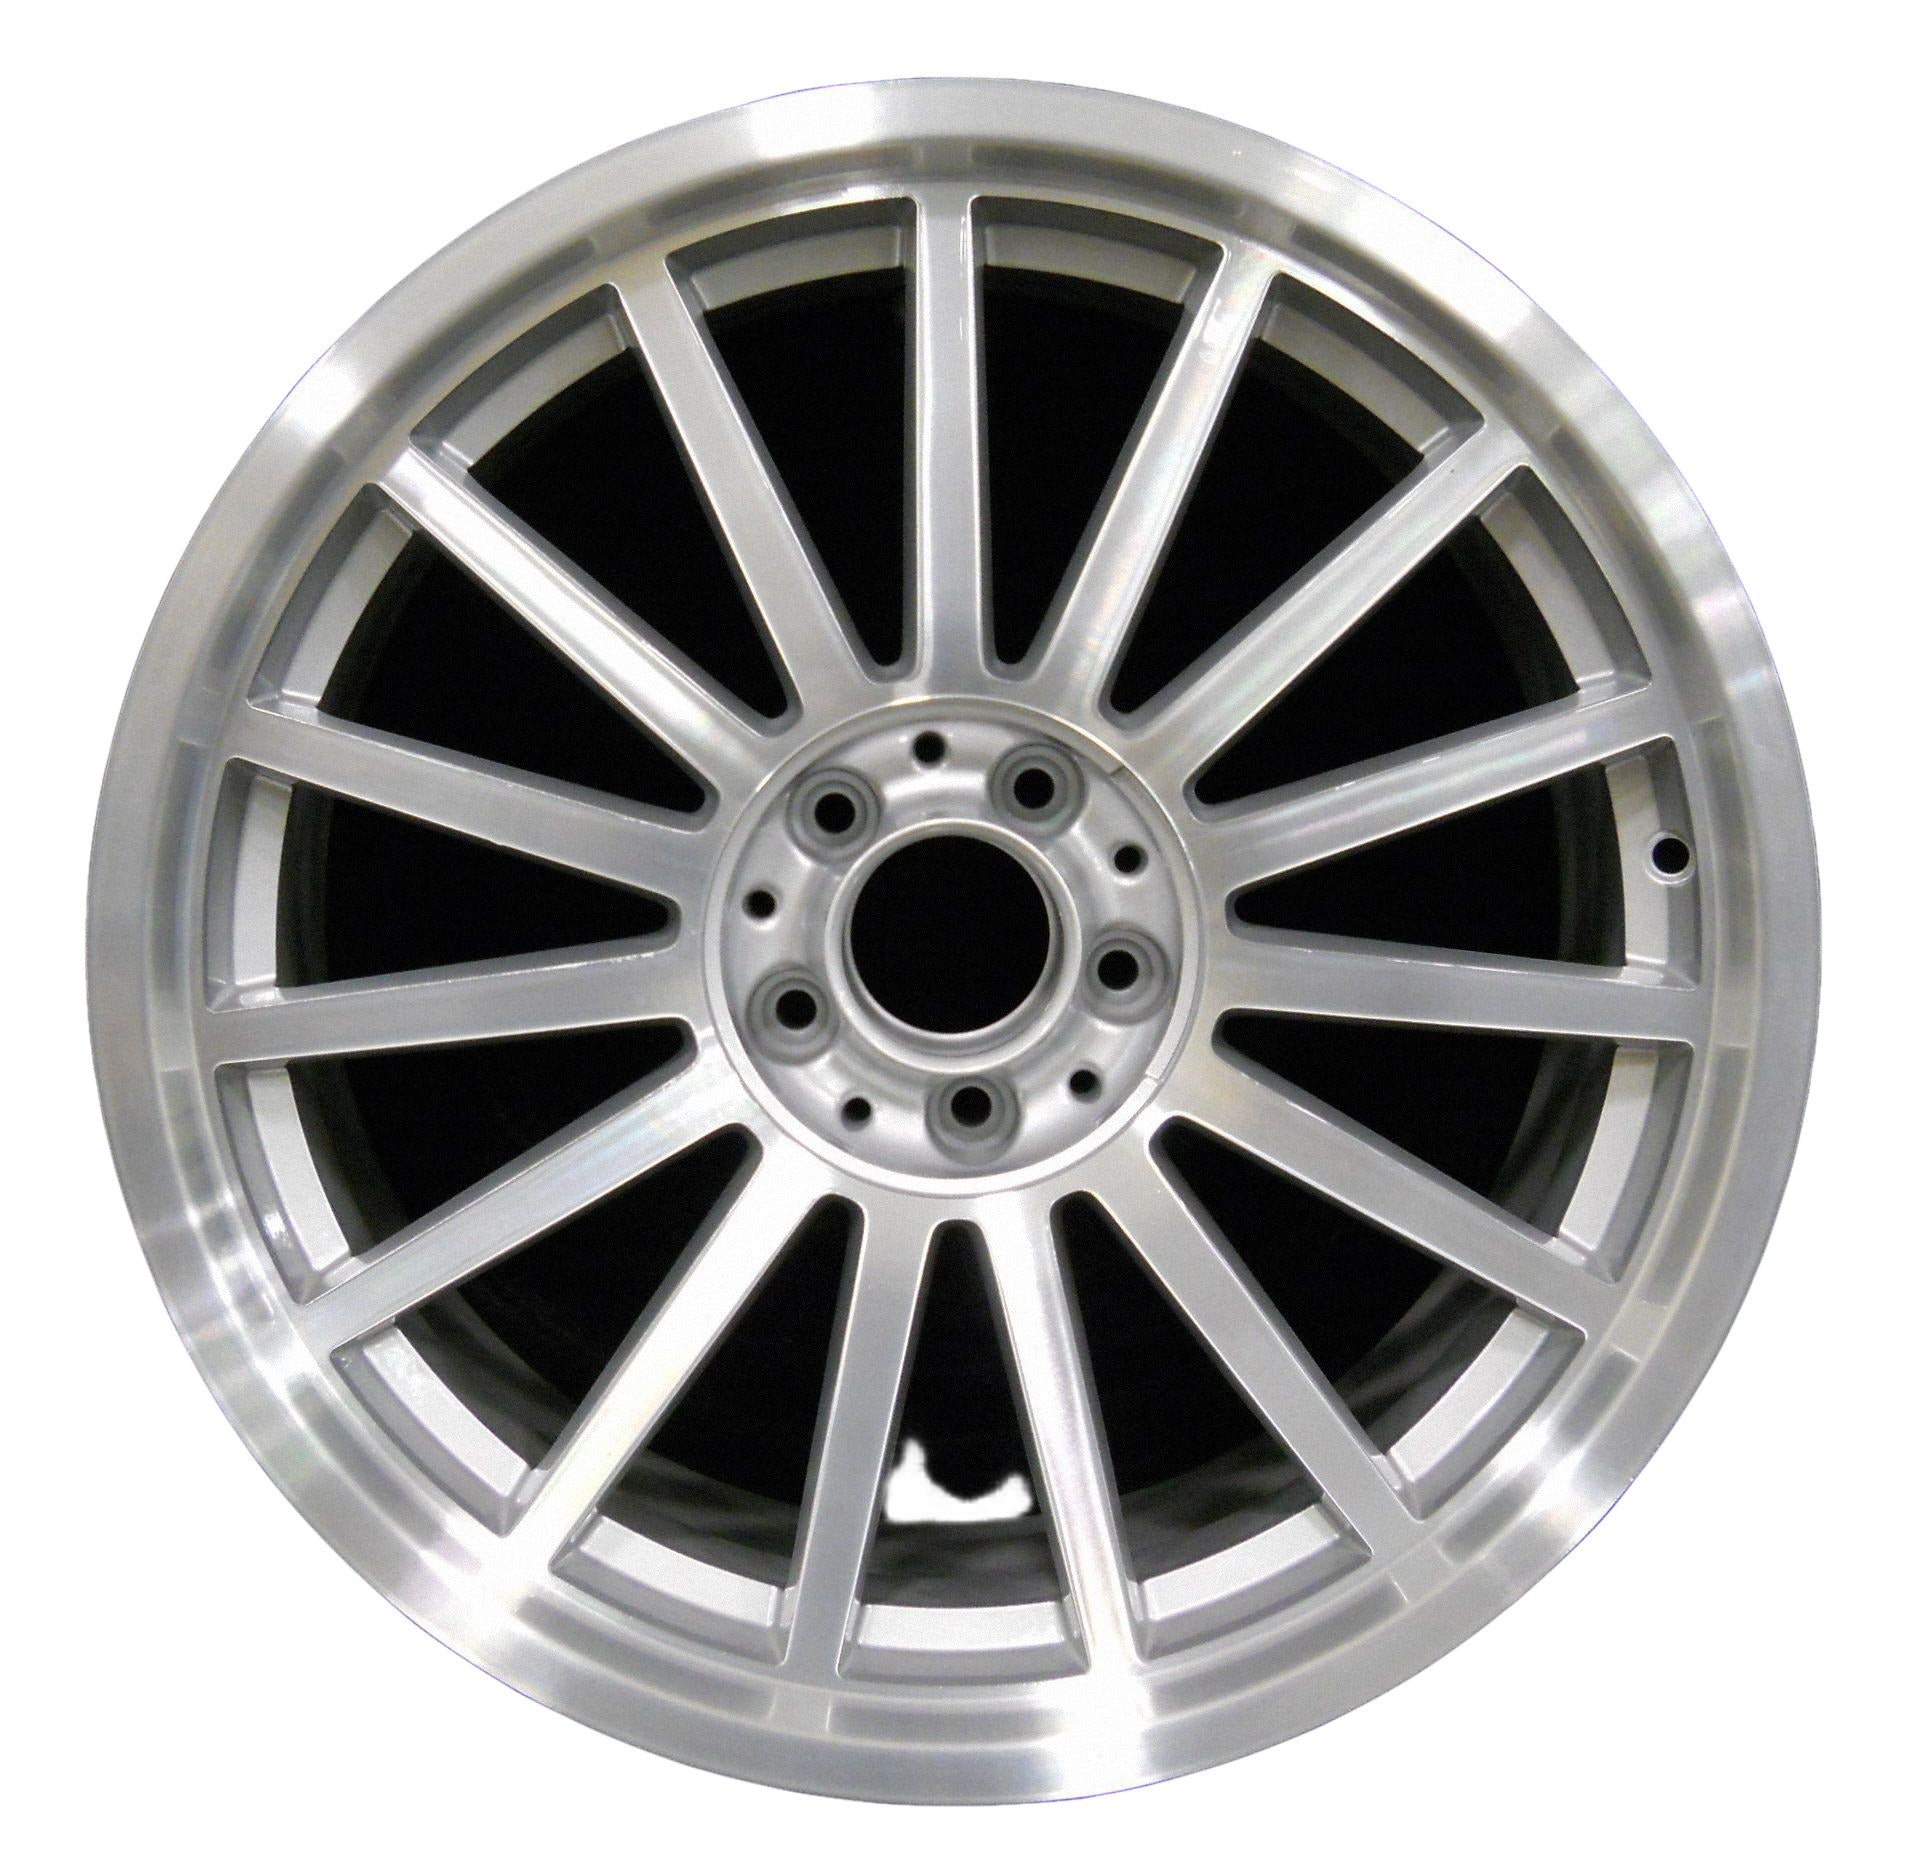 Chrysler Crossfire  2005, 2006, 2007 Factory OEM Car Wheel Size 18x7.5 Alloy WAO.2249FT.PS10.MA